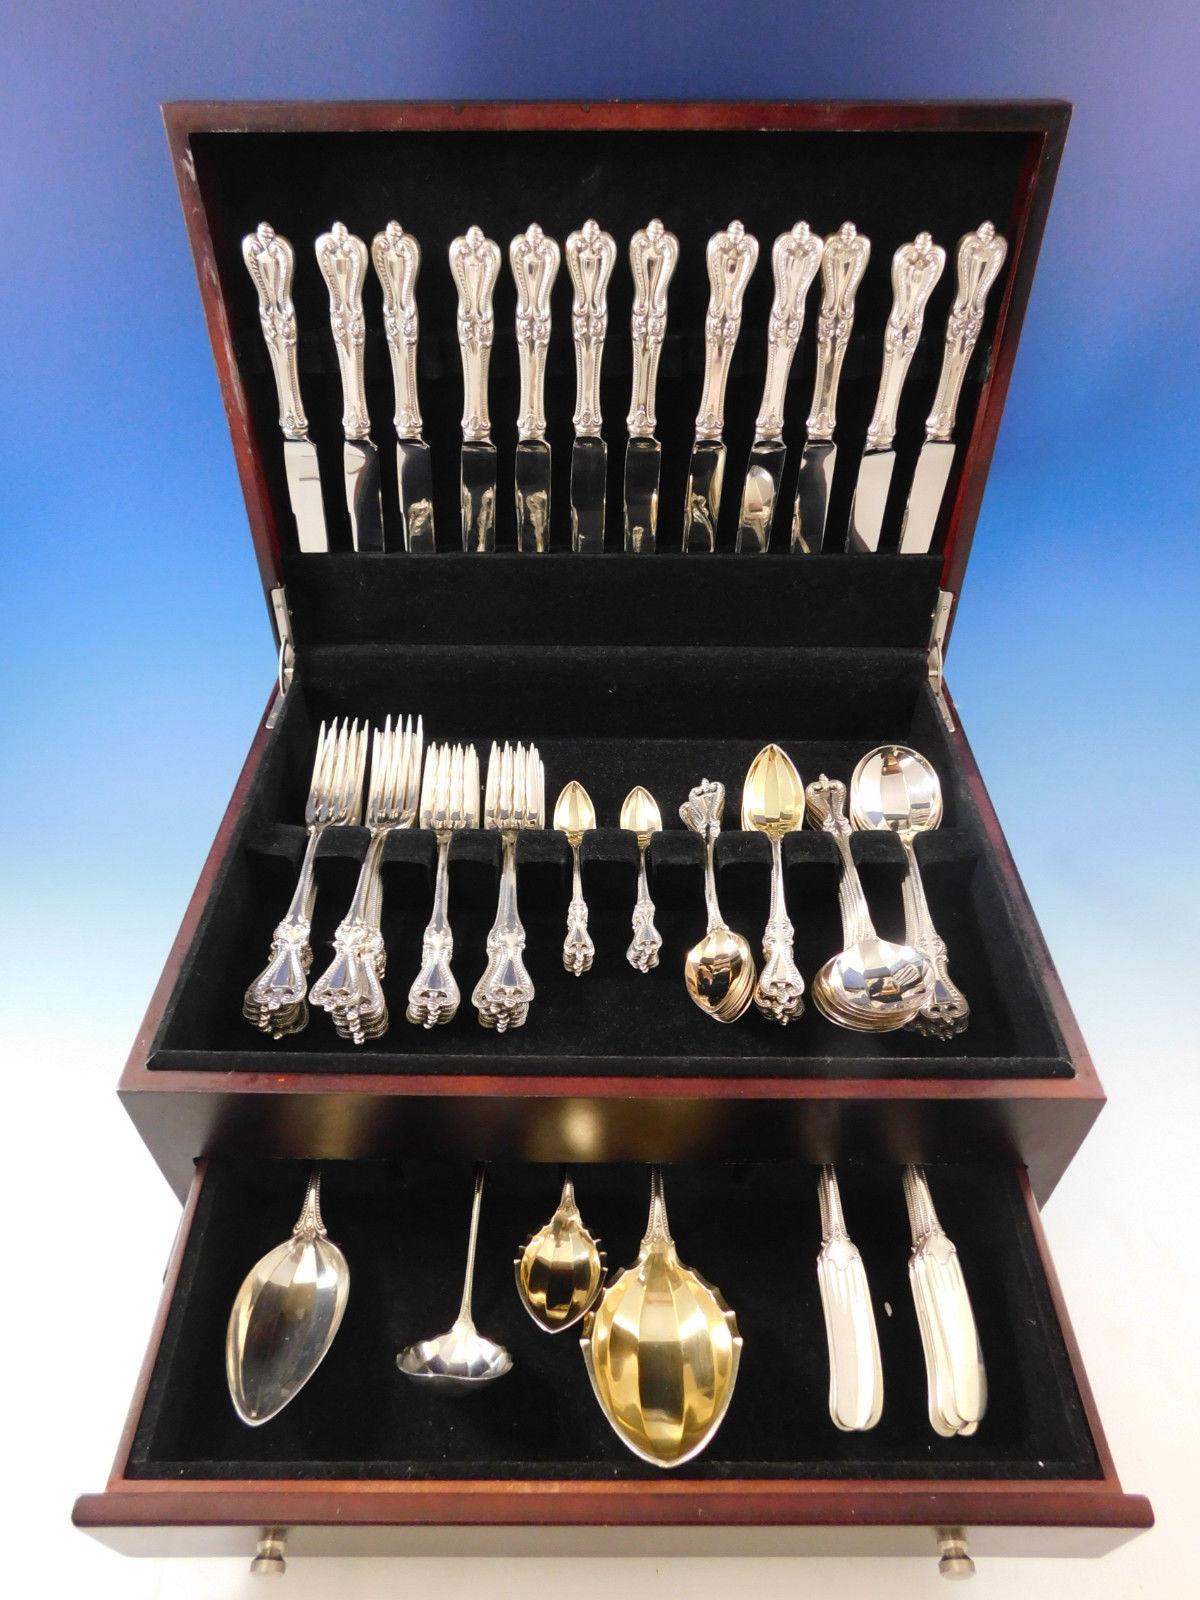 Exquisites Old Colonial by Towle Besteck aus Sterlingsilber - 88 Teile. Dieses Set enthält:

12 Messer, 8 7/8